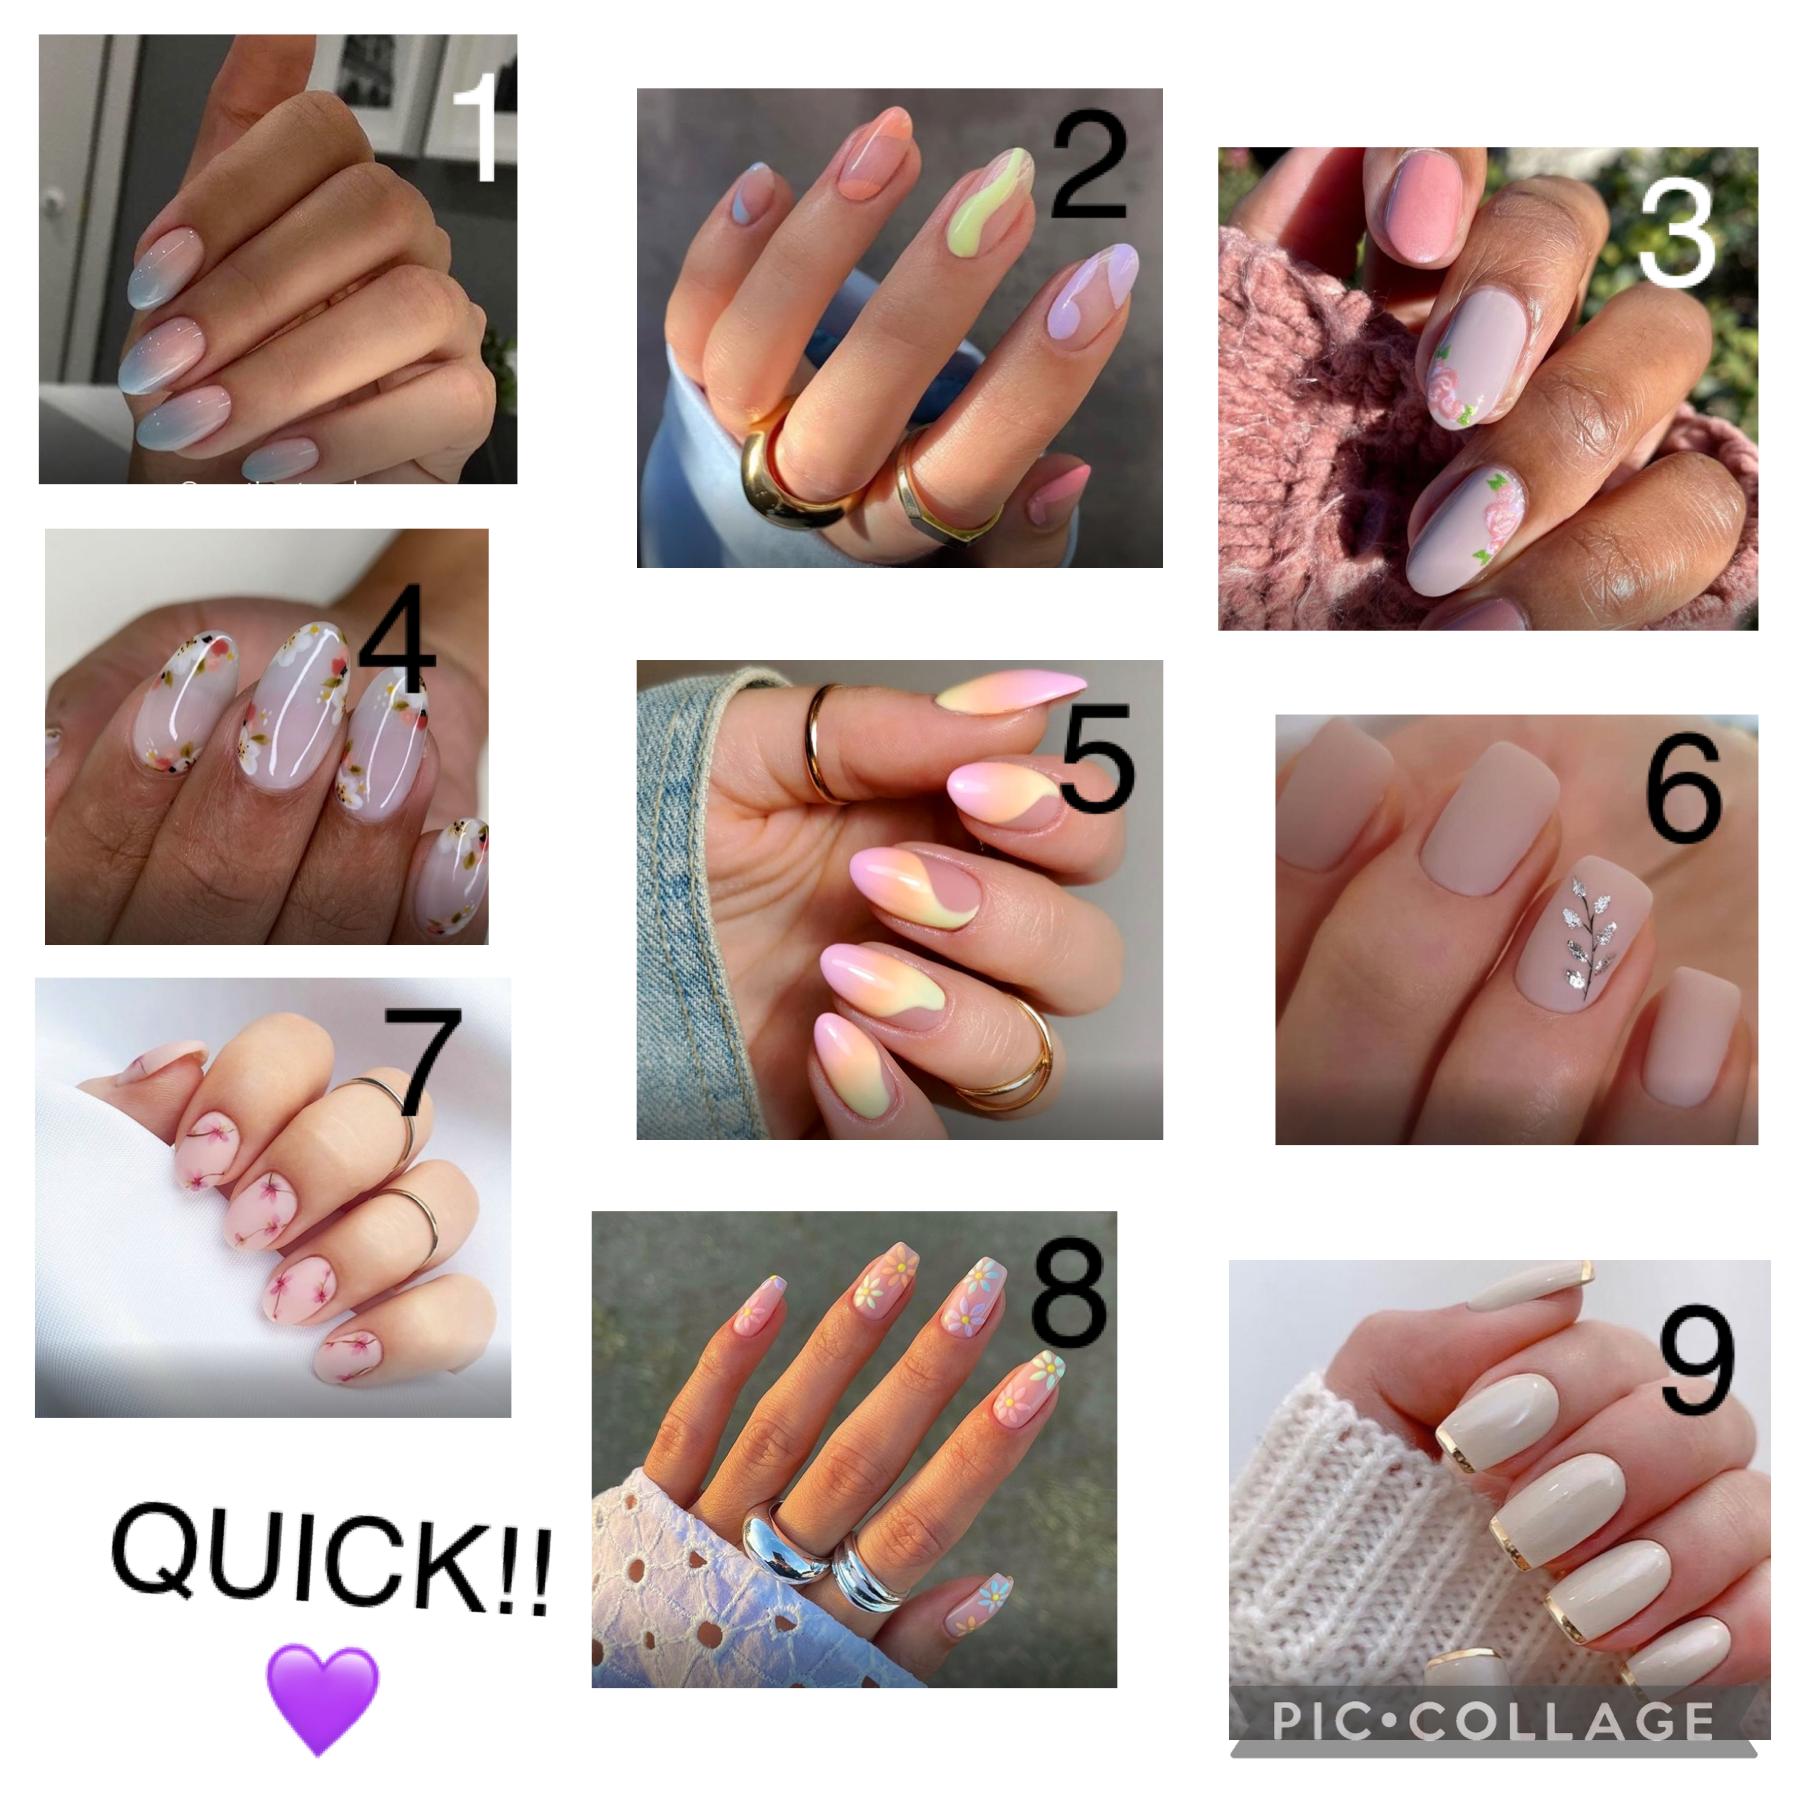 i need help picking my spring nail design!! just pick 1-9 💞💞🌸